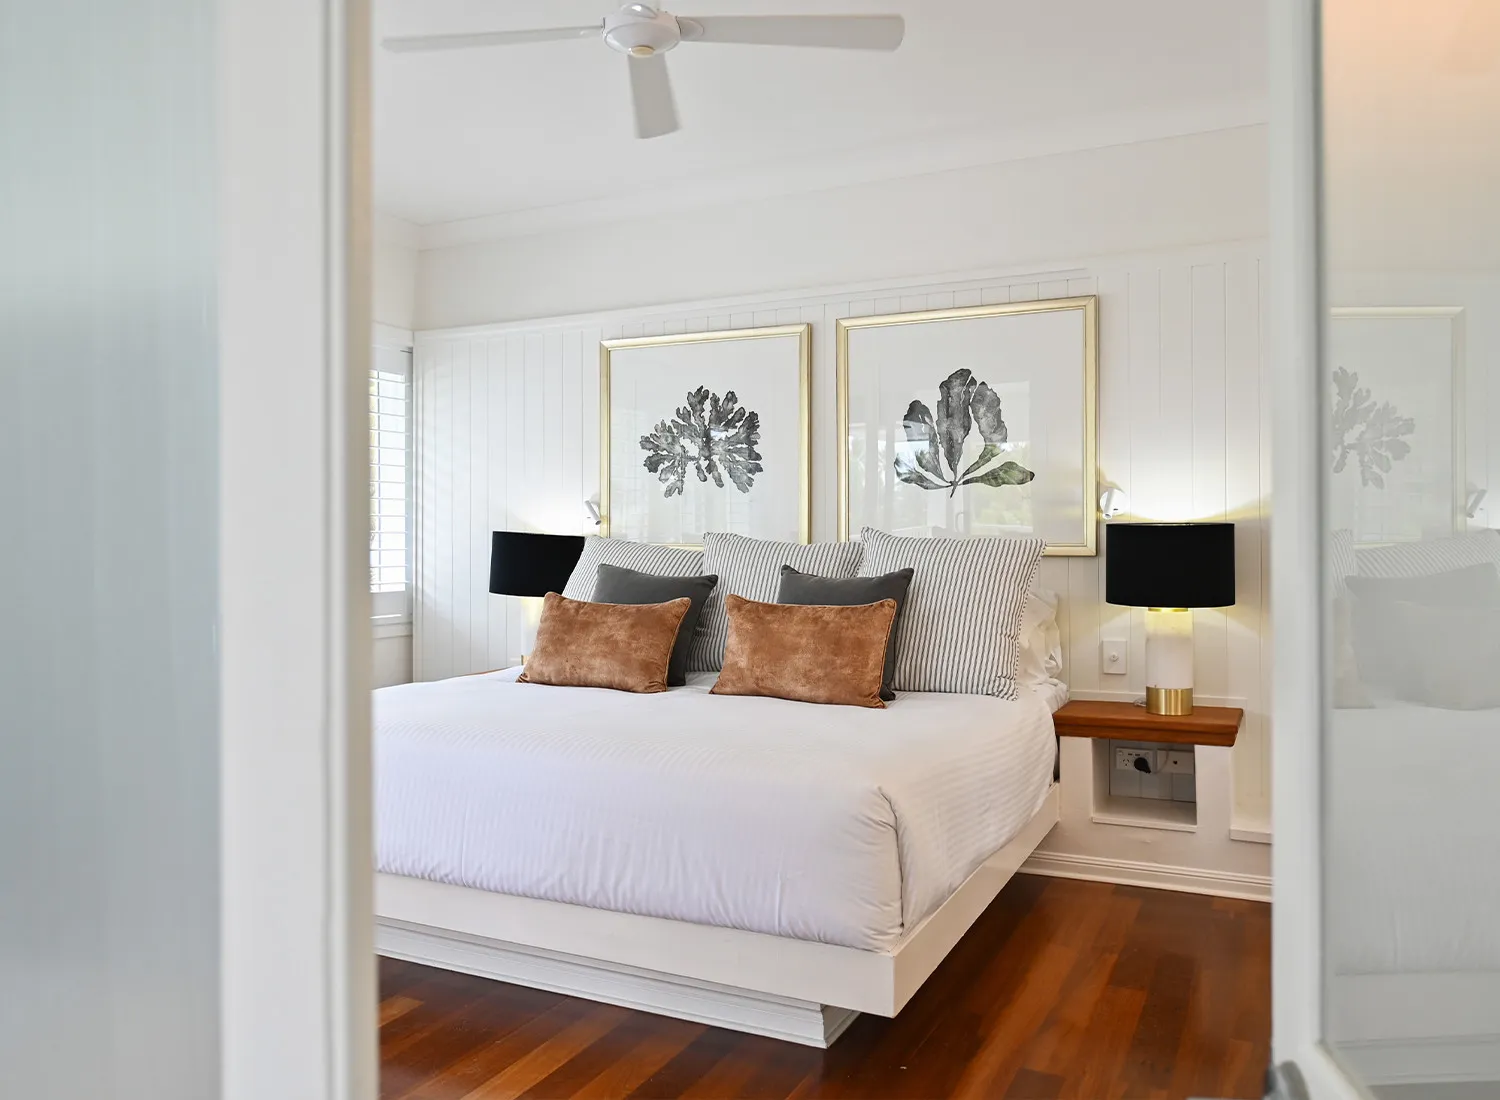 Alamanda Palm Cove by Lancemore Boutique Luxury Accommodation Three bedroom Apartment 1100 x 1500 v2